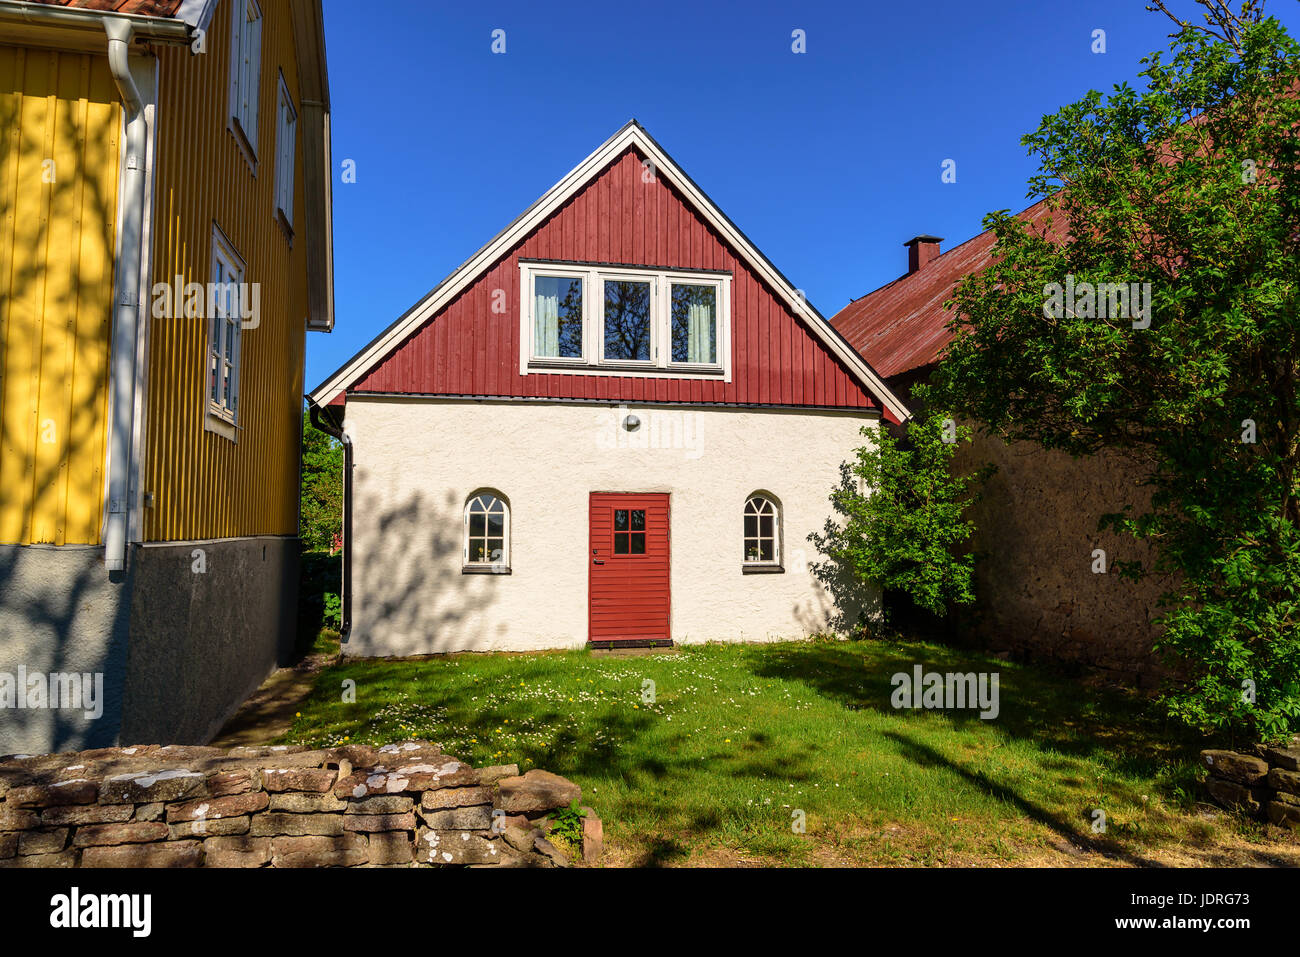 House built in a very tight squeeze between two other houses on a narrow property. Stock Photo